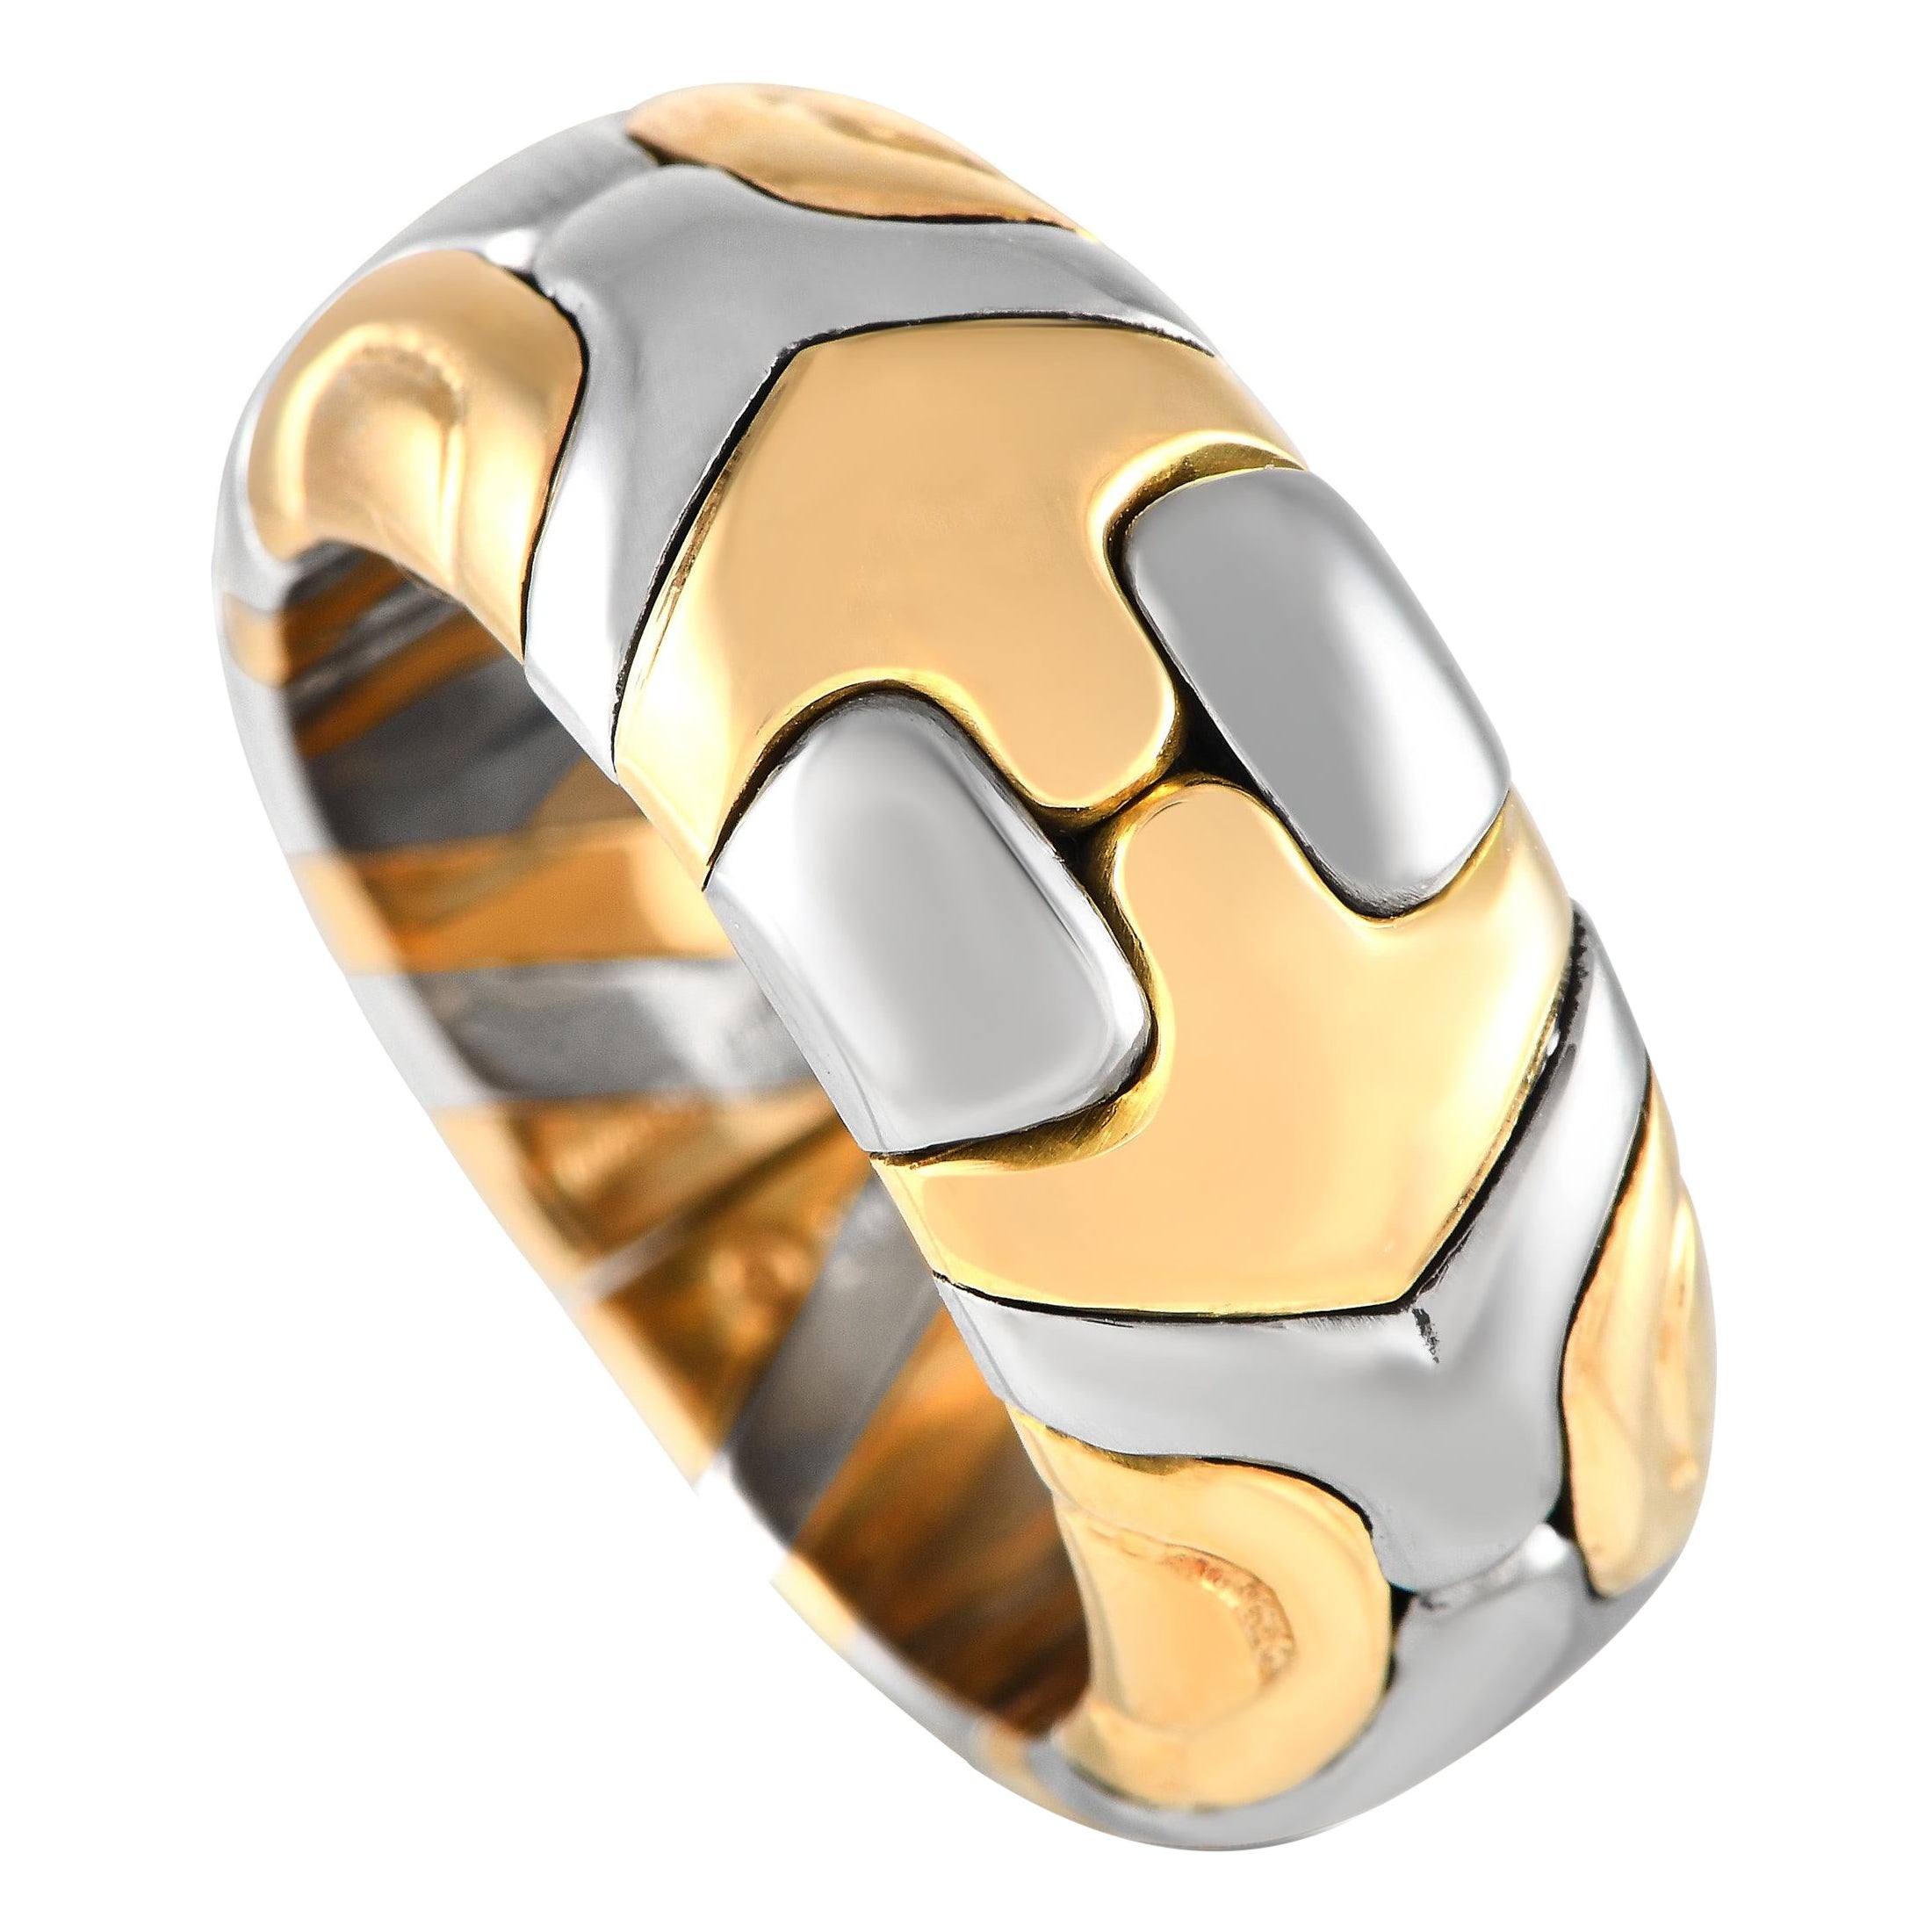 Bvlgari Alveare 18K Yellow Gold and Stainless Steel Ring BV14-012524